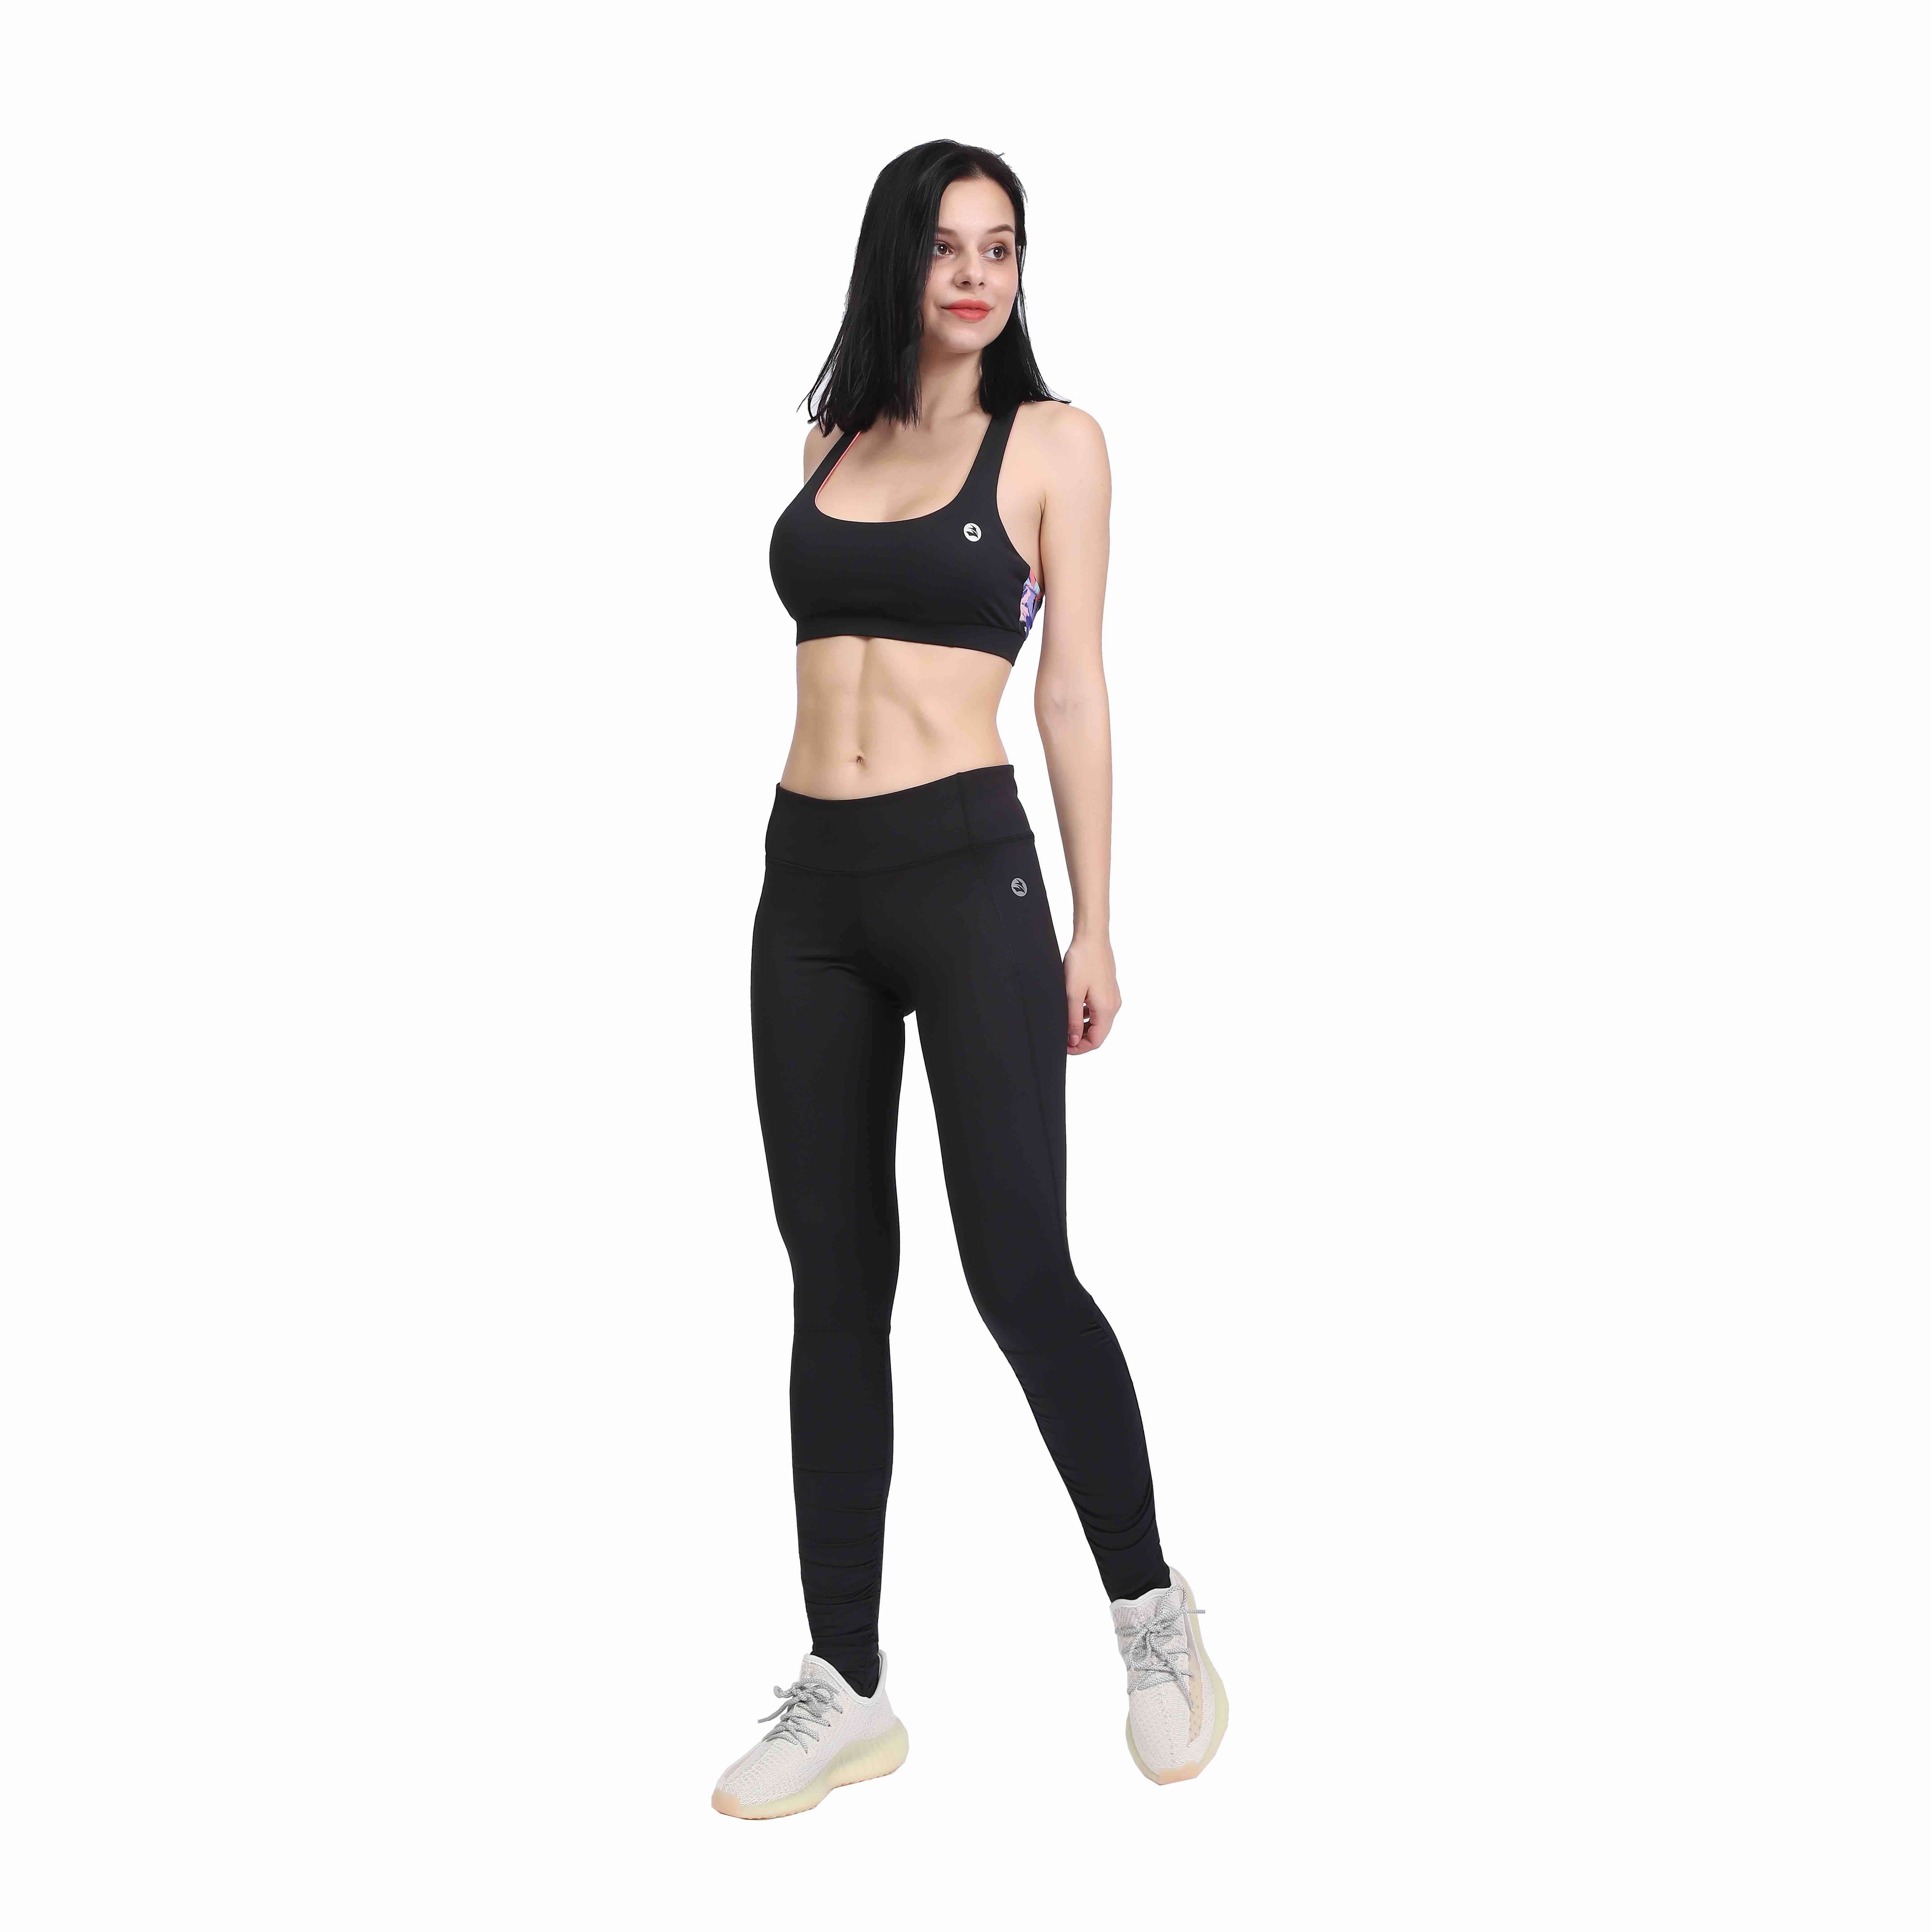 Women's Long Yoga Pants Sports Leggings With Crotch Gusset Running Tights High Waist Stretch Fitness Trousers